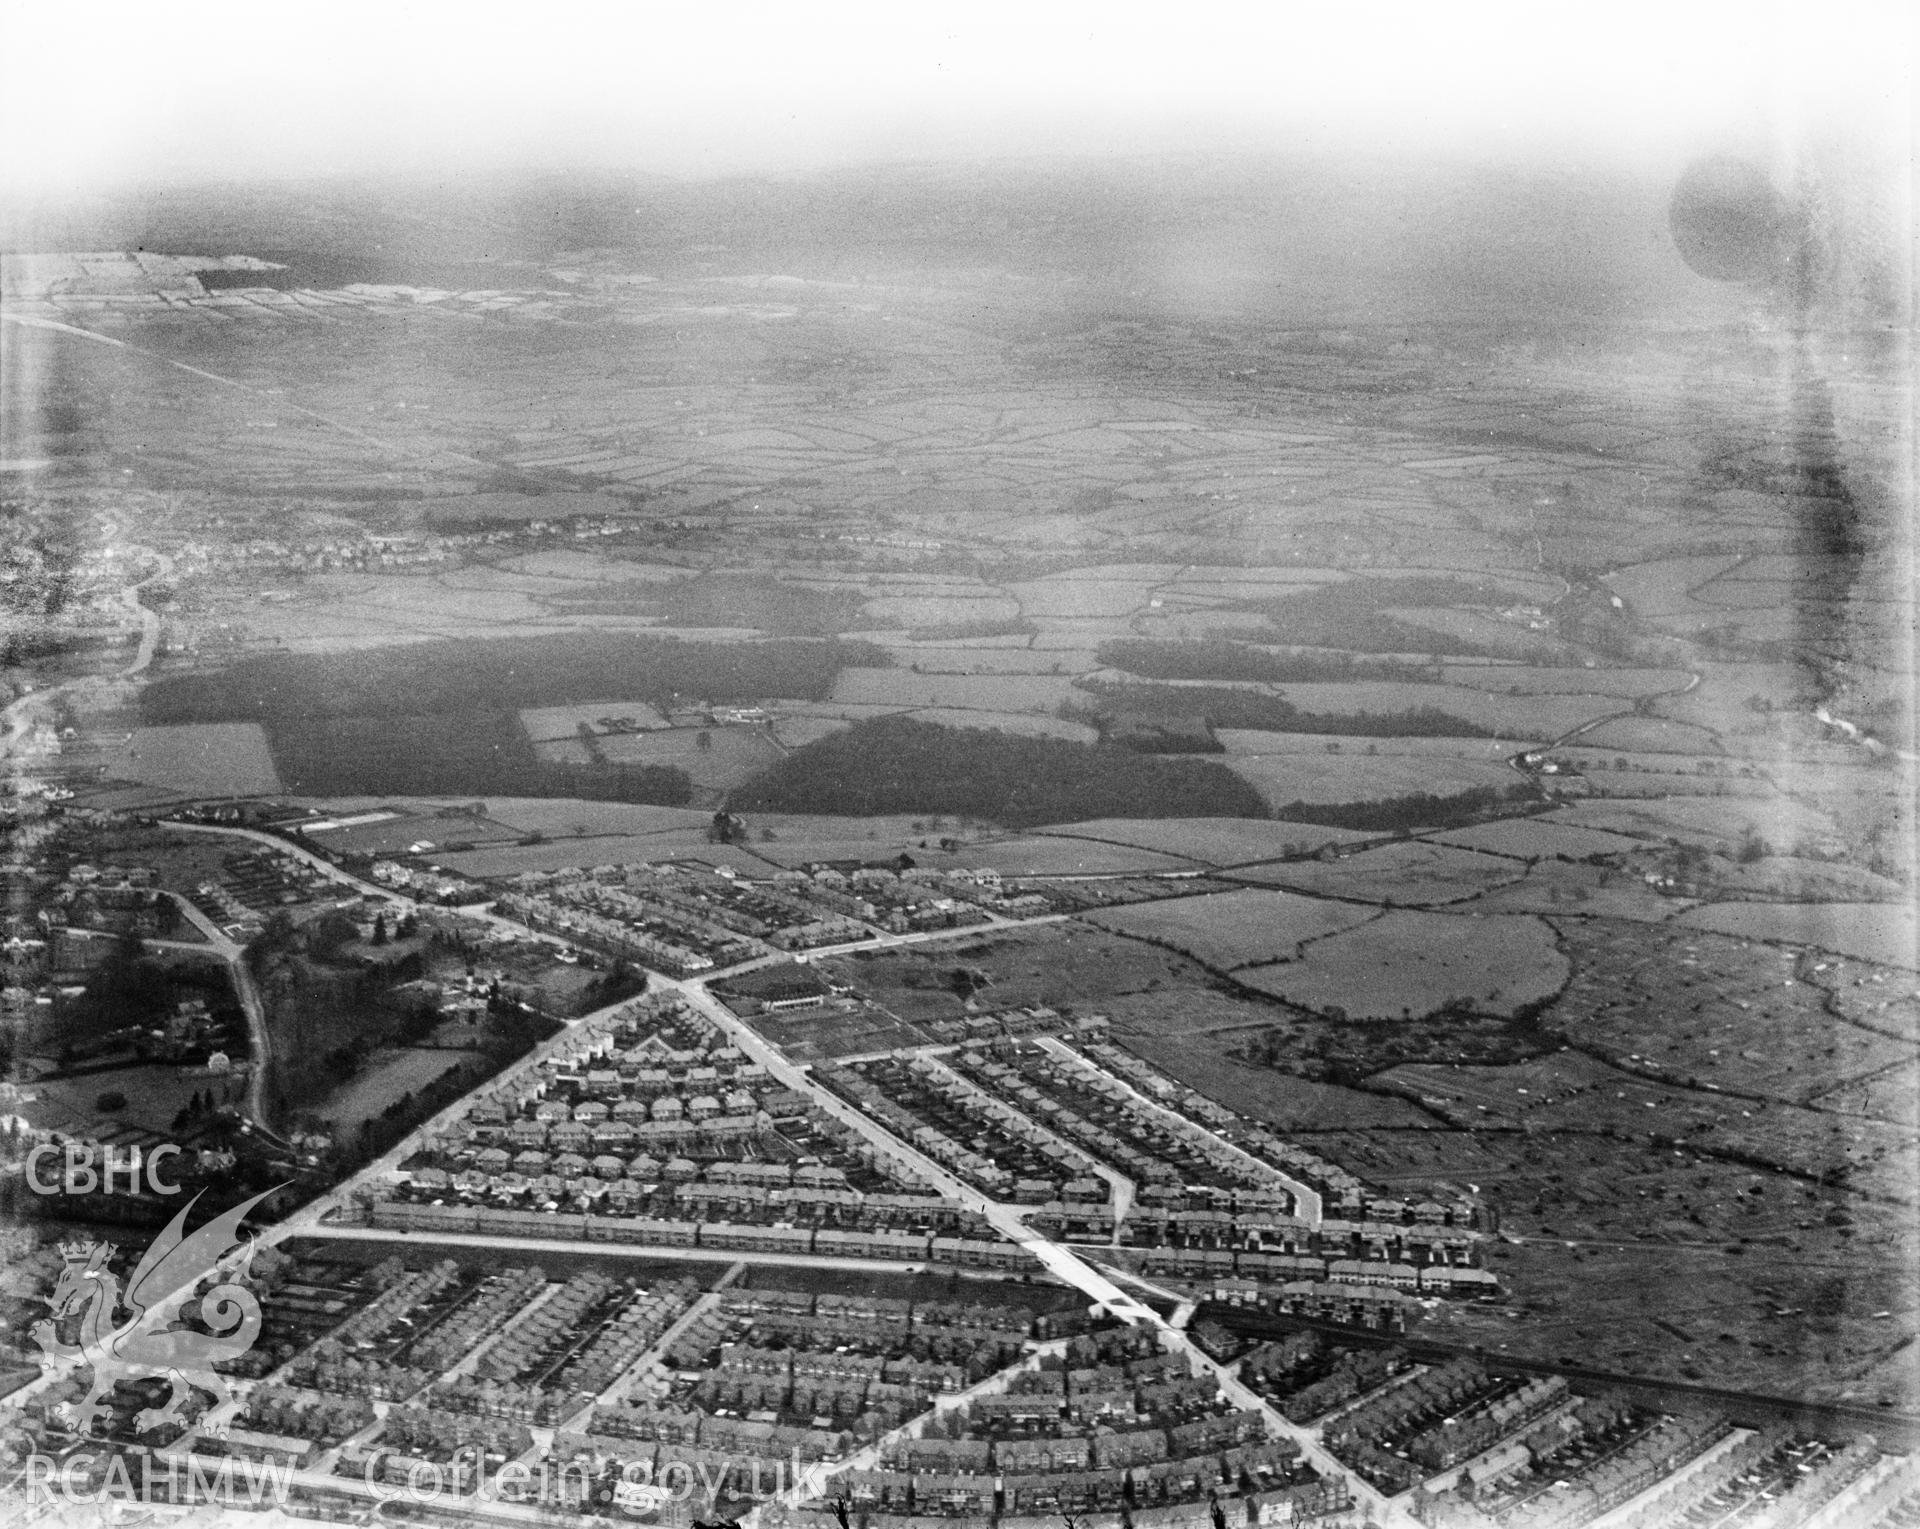 View near Cardiff showing parts of Llanishen, oblique aerial view. 5?x4? black and white glass plate negative.